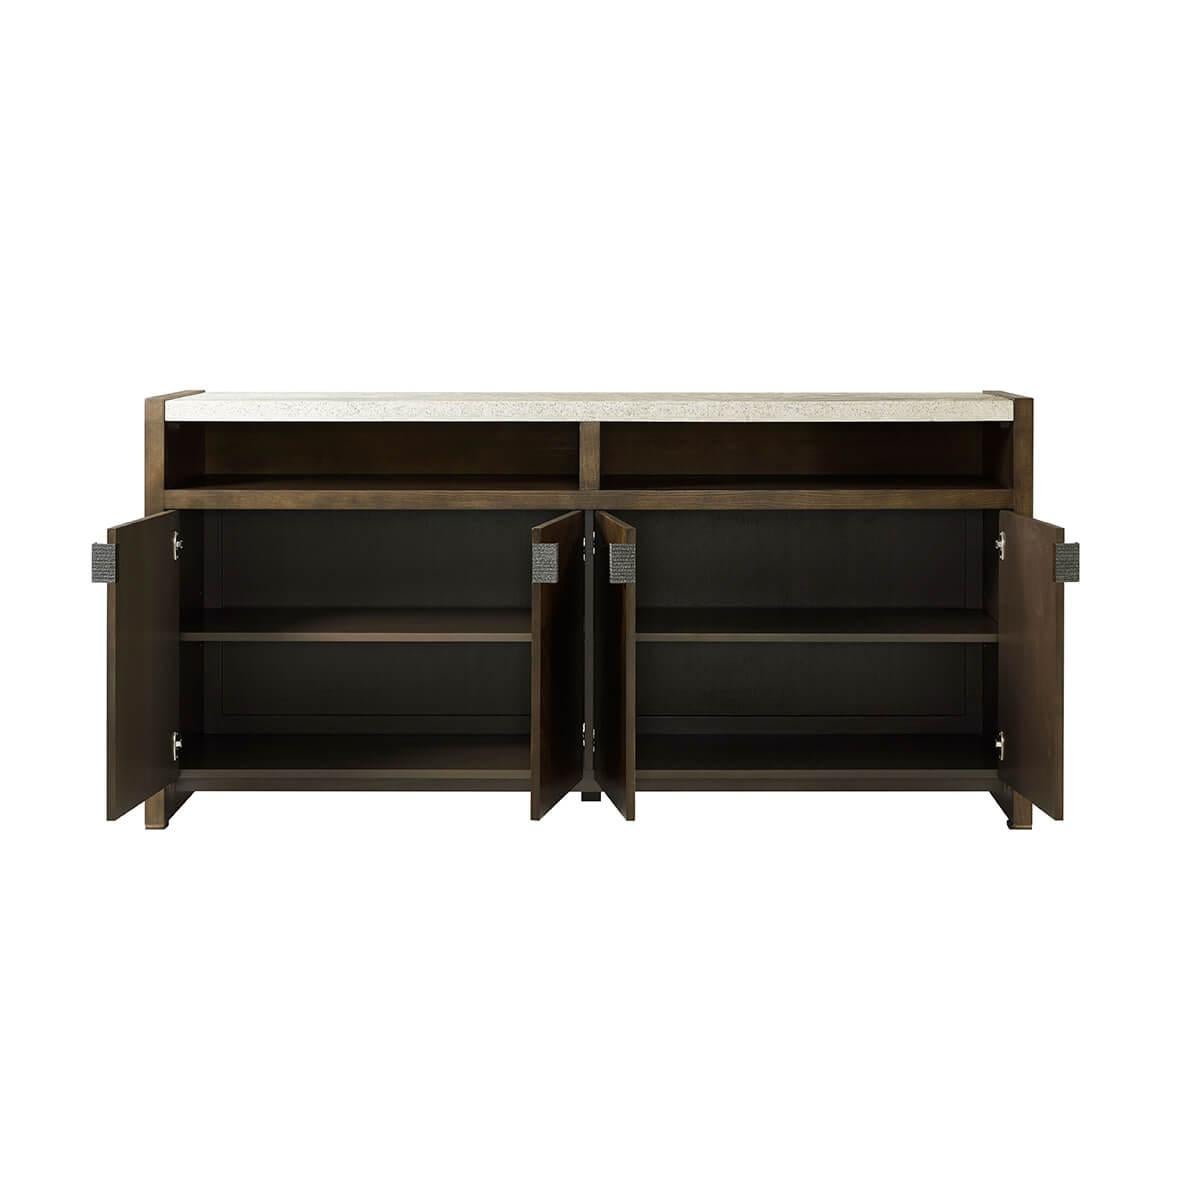 a minimalist four-door sideboard with peaceful symmetry in figured cathedral ash in our dark Earth finish, with metal pulls in Ember completed with a top done in our stone-like porous Mineral finish. 

With two open shelves and two adjustable